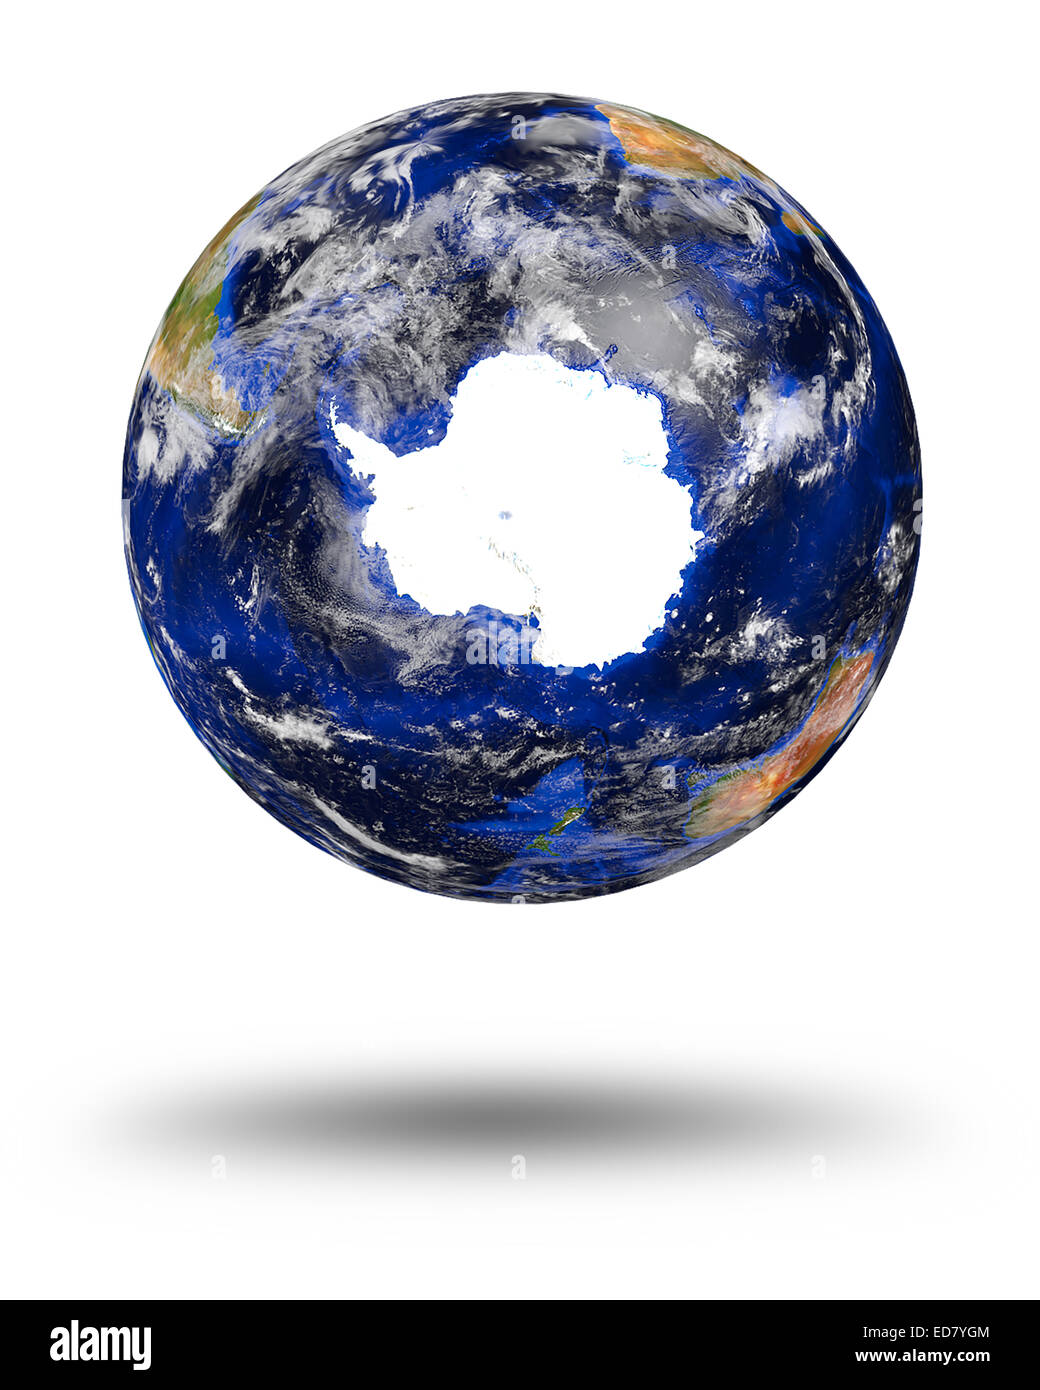 blue marble planet earth Stock Photo